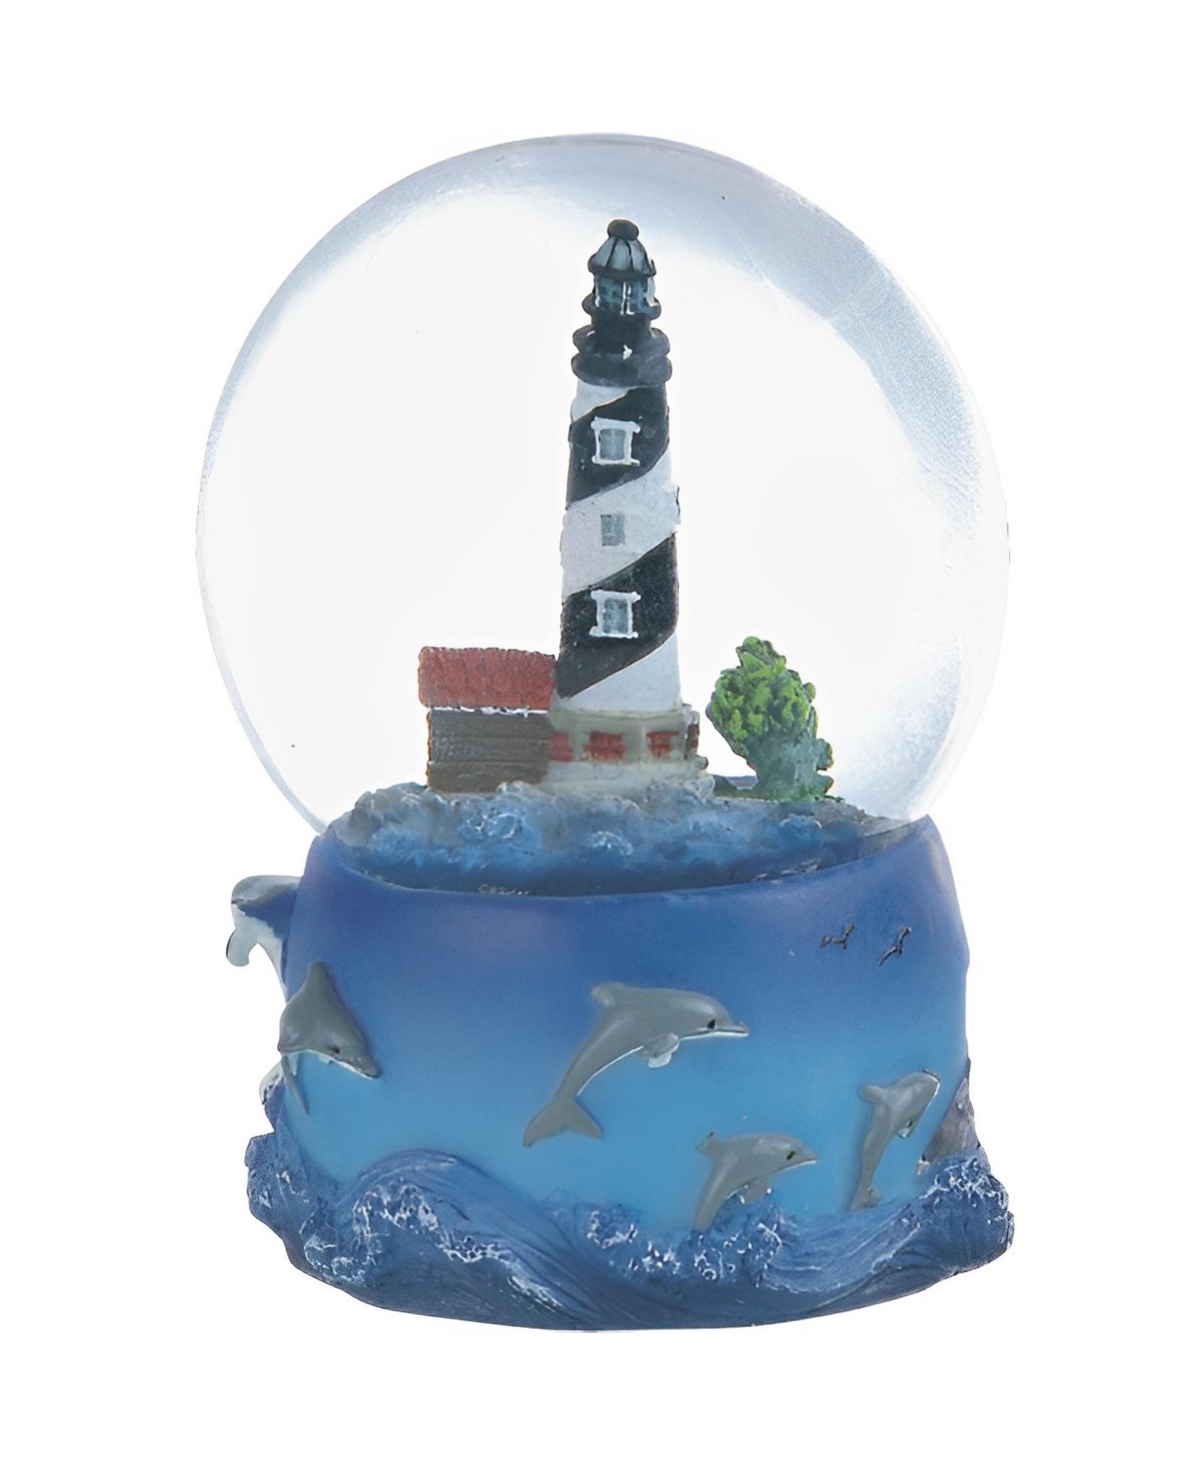 3.5"H Cape Hatteras Lighthouse Glitter Snow Globe Figurine Home Decor Perfect Gift for House Warming, Holidays and Birthdays - Multicolor